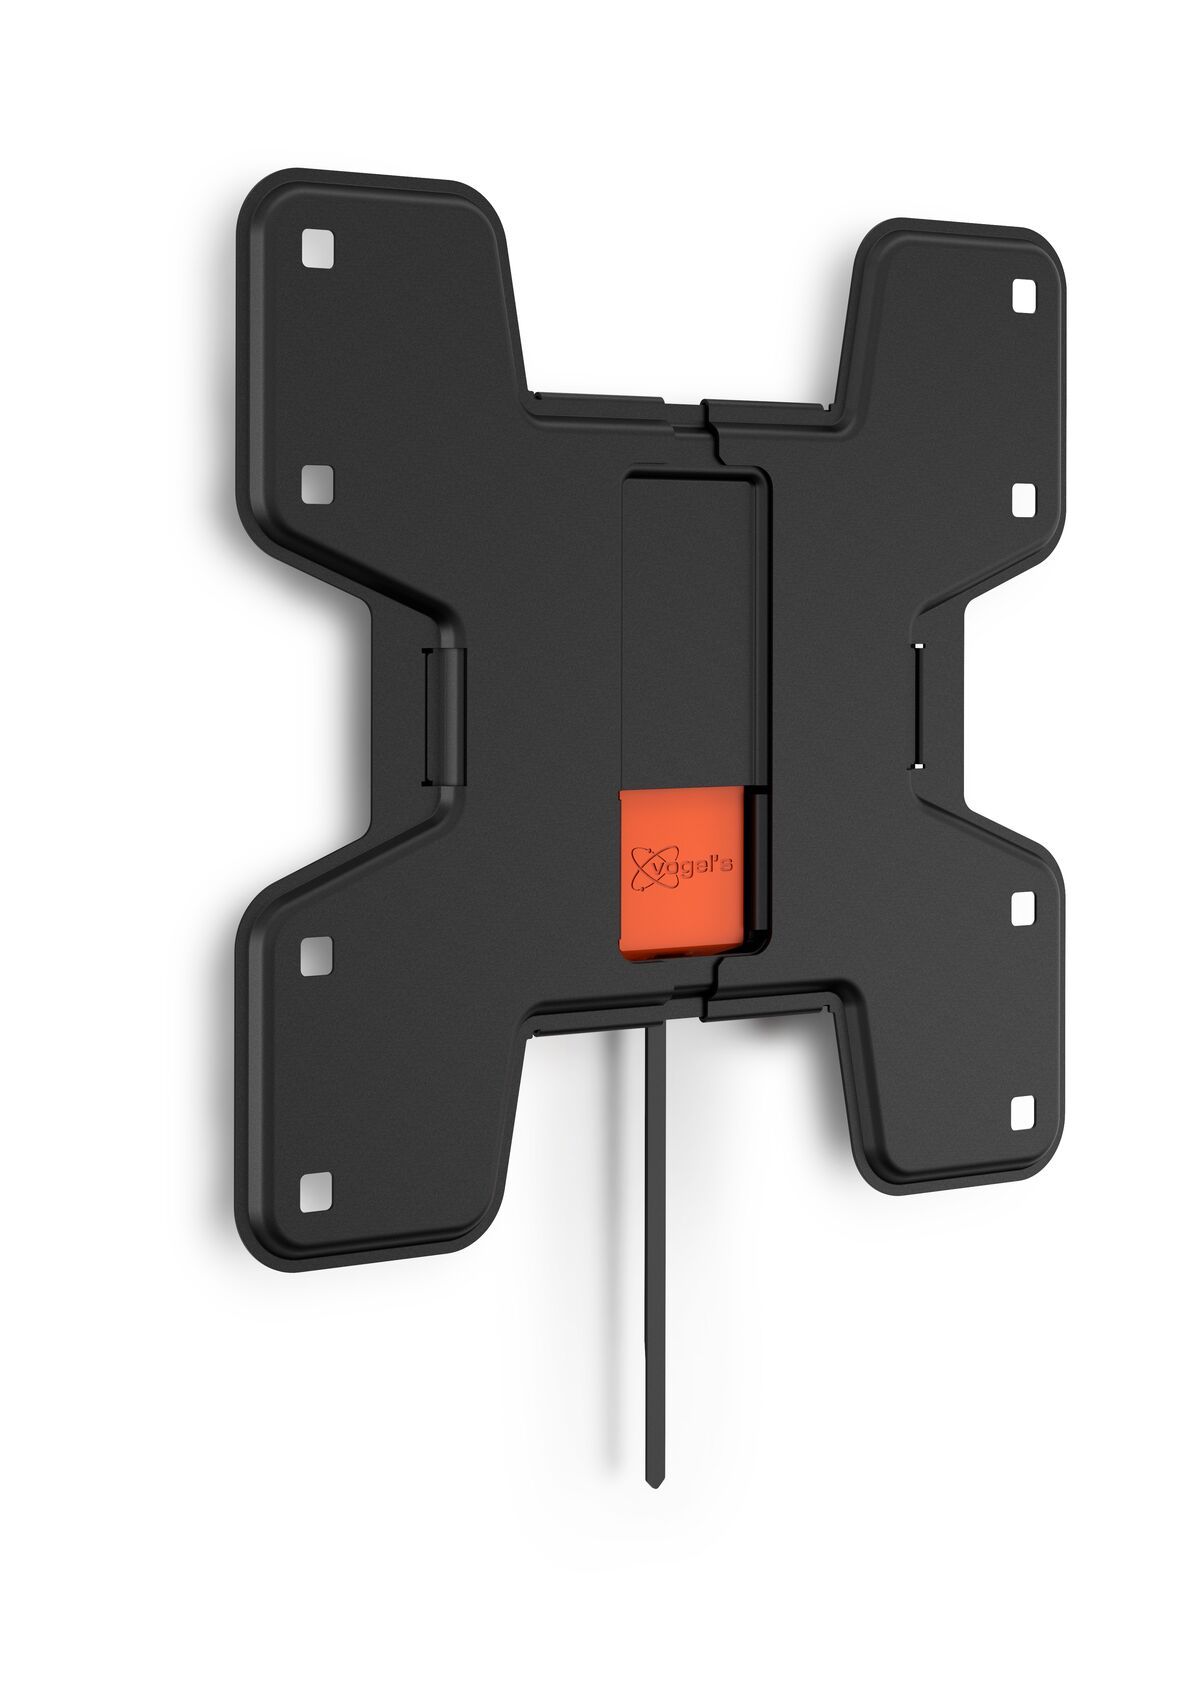 Vogel's WALL 3105 Fixed TV Wall Mount - Suitable for 19 up to 43 inch TVs up to Product